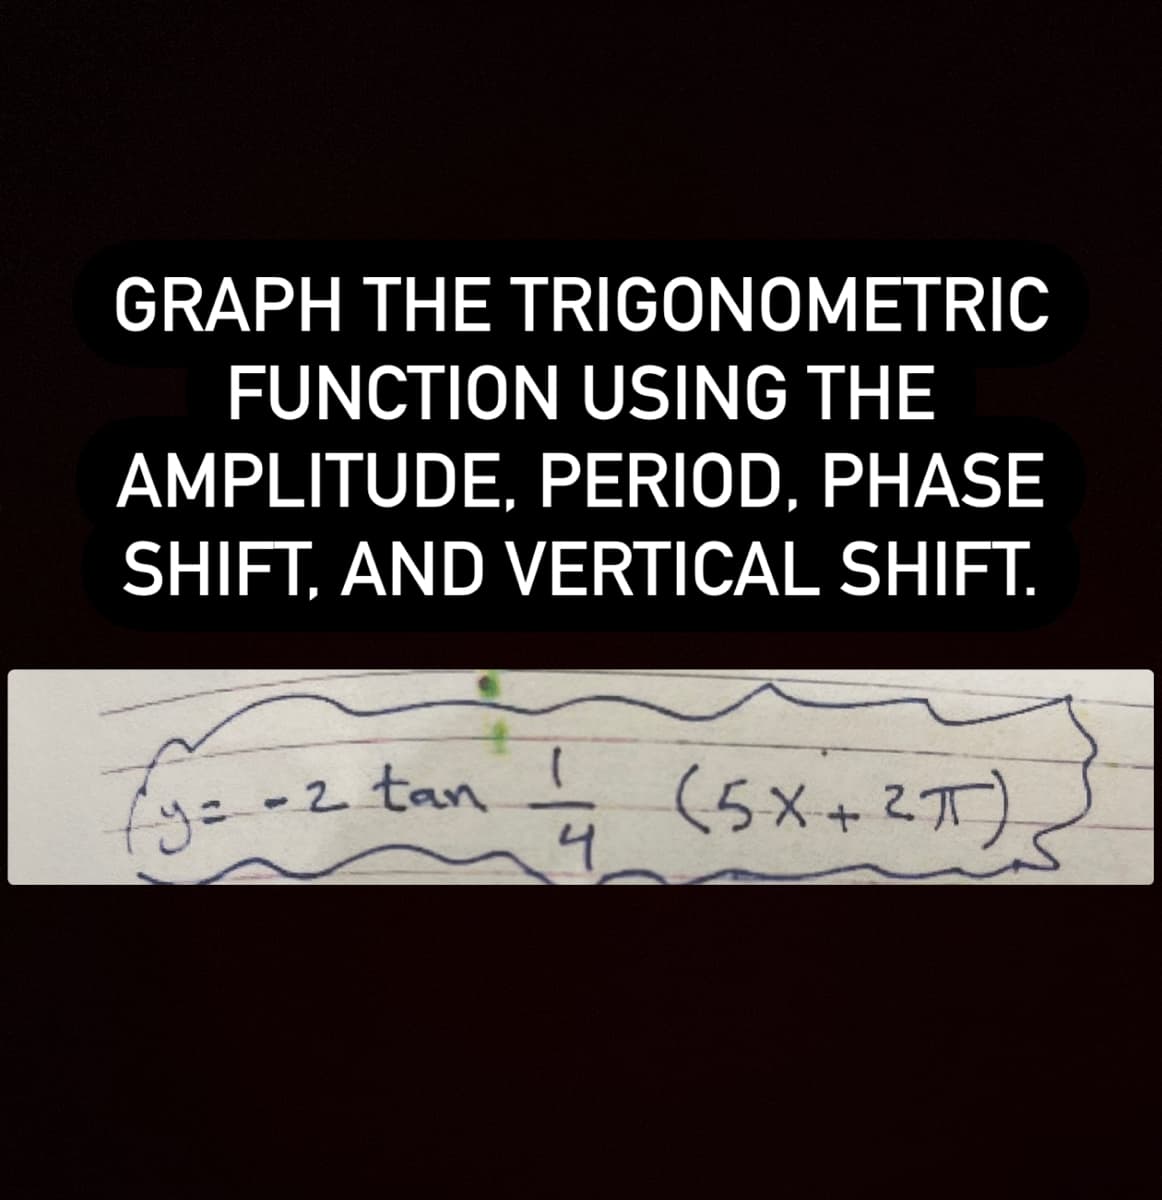 GRAPH THE TRIGONOMETRIC
FUNCTION USING THE
AMPLITUDE, PERIOD, PHASE
SHIFT, AND VERTICAL SHIFT.
Ey=-2 tan
(5x+2オ)
4.
